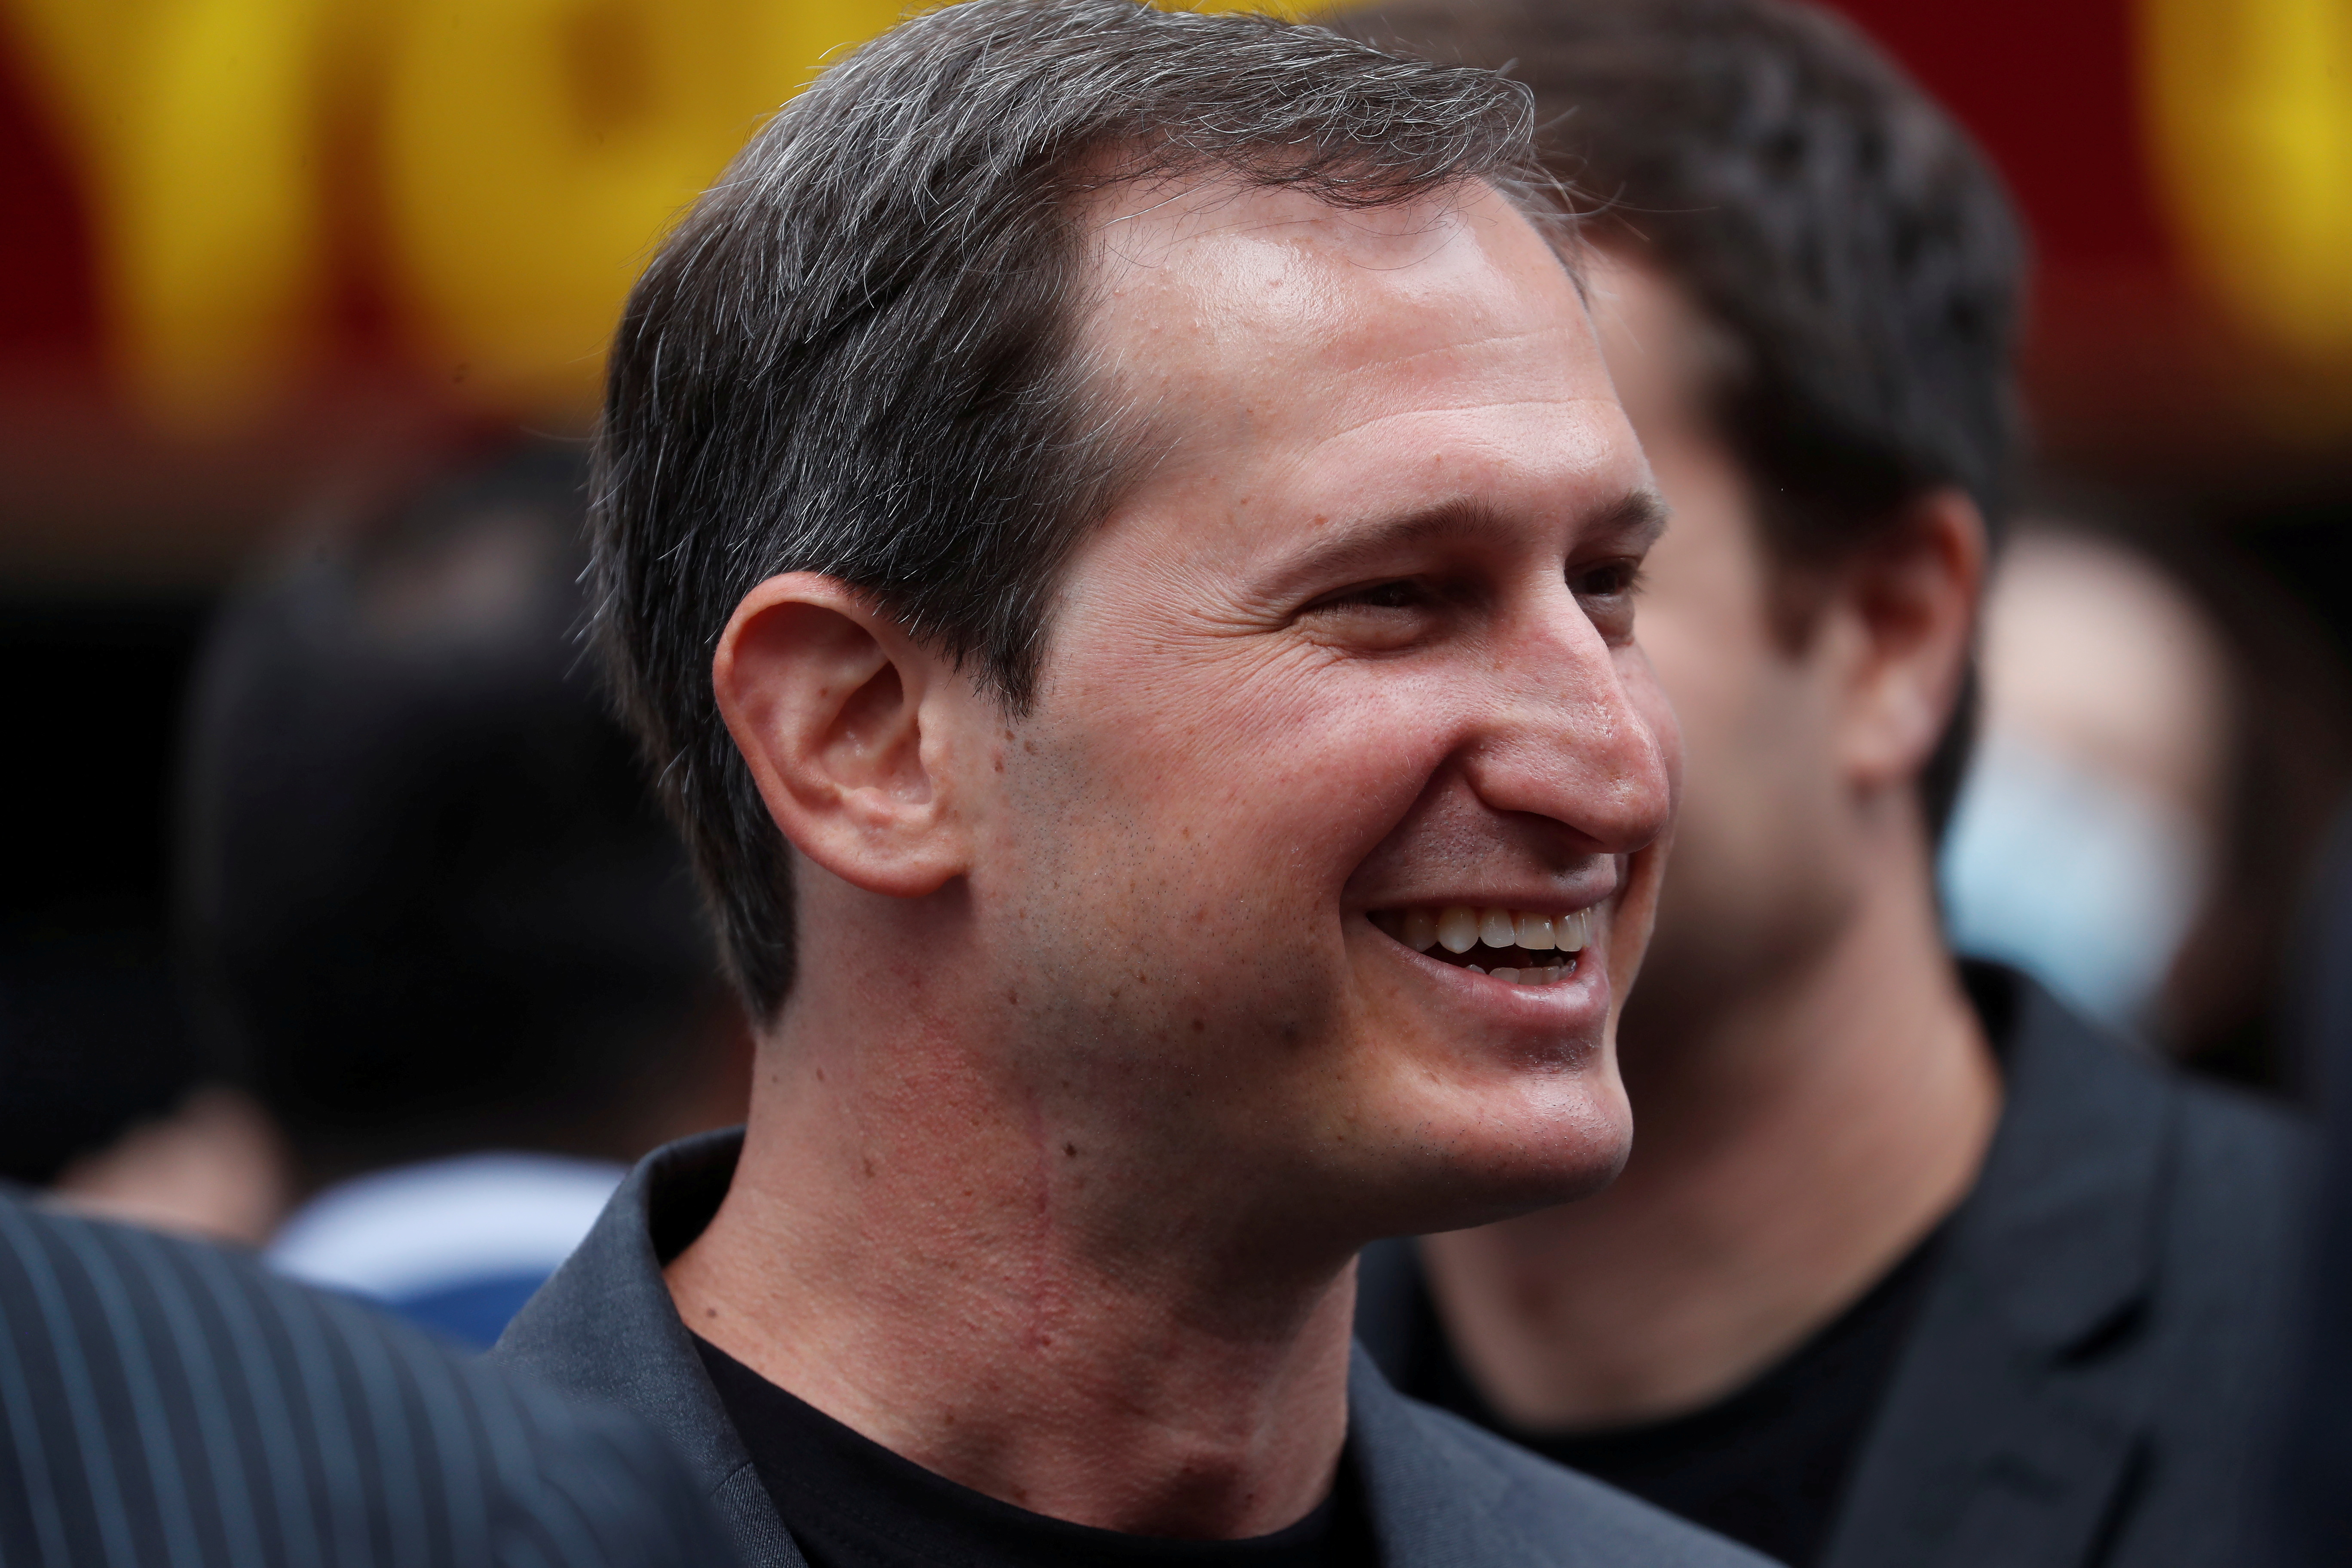 Jason Robins, CEO of DraftKings, smiles after the company's initial public offering (IPO) listing, outside the Nasdaq MarketSite, in New York City